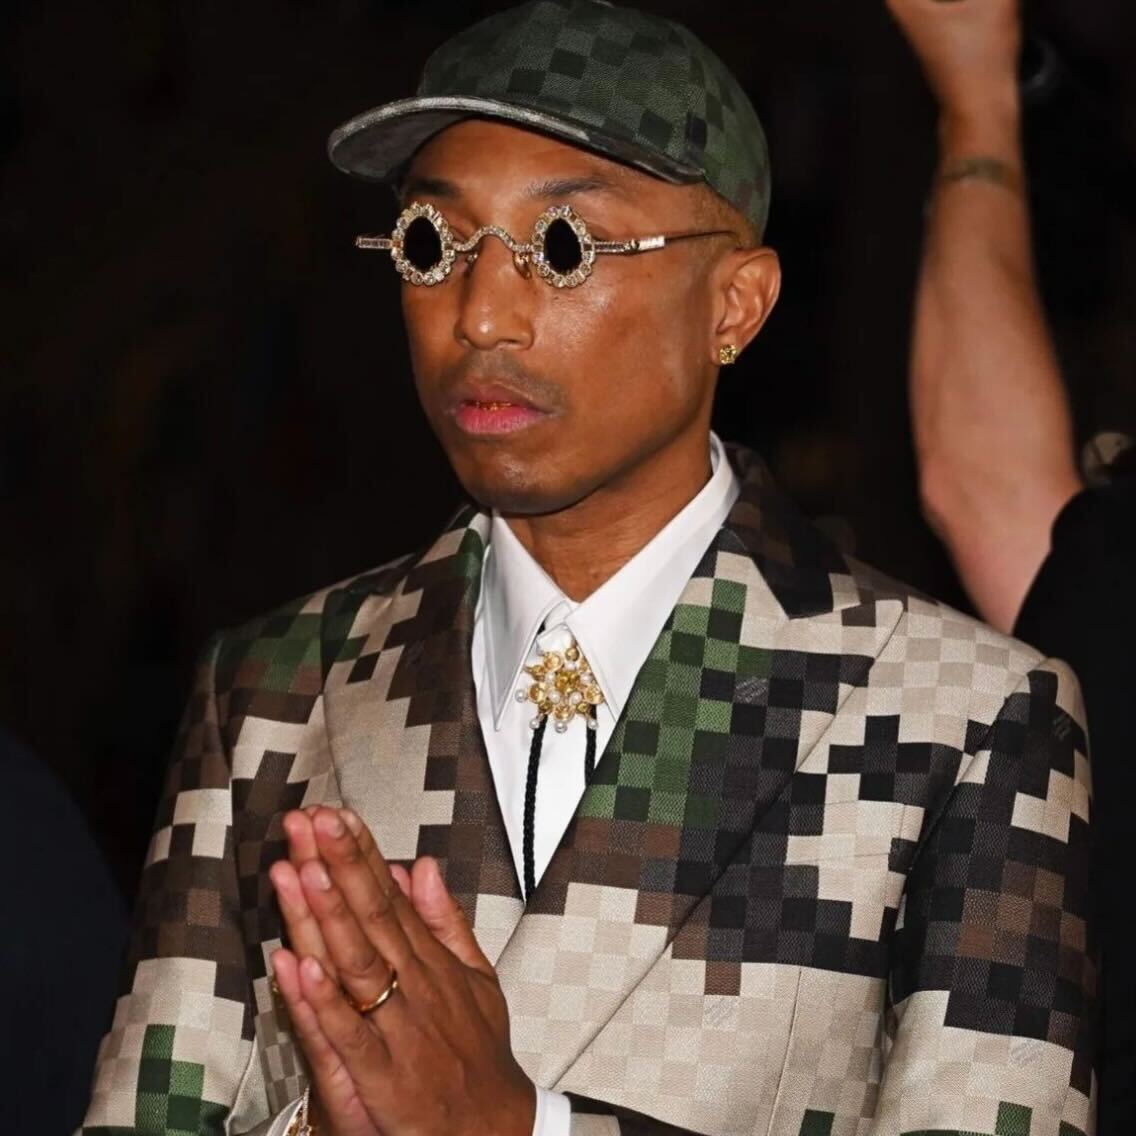 Pharrell Williams impressed in a pair of $100k sunglasses at his